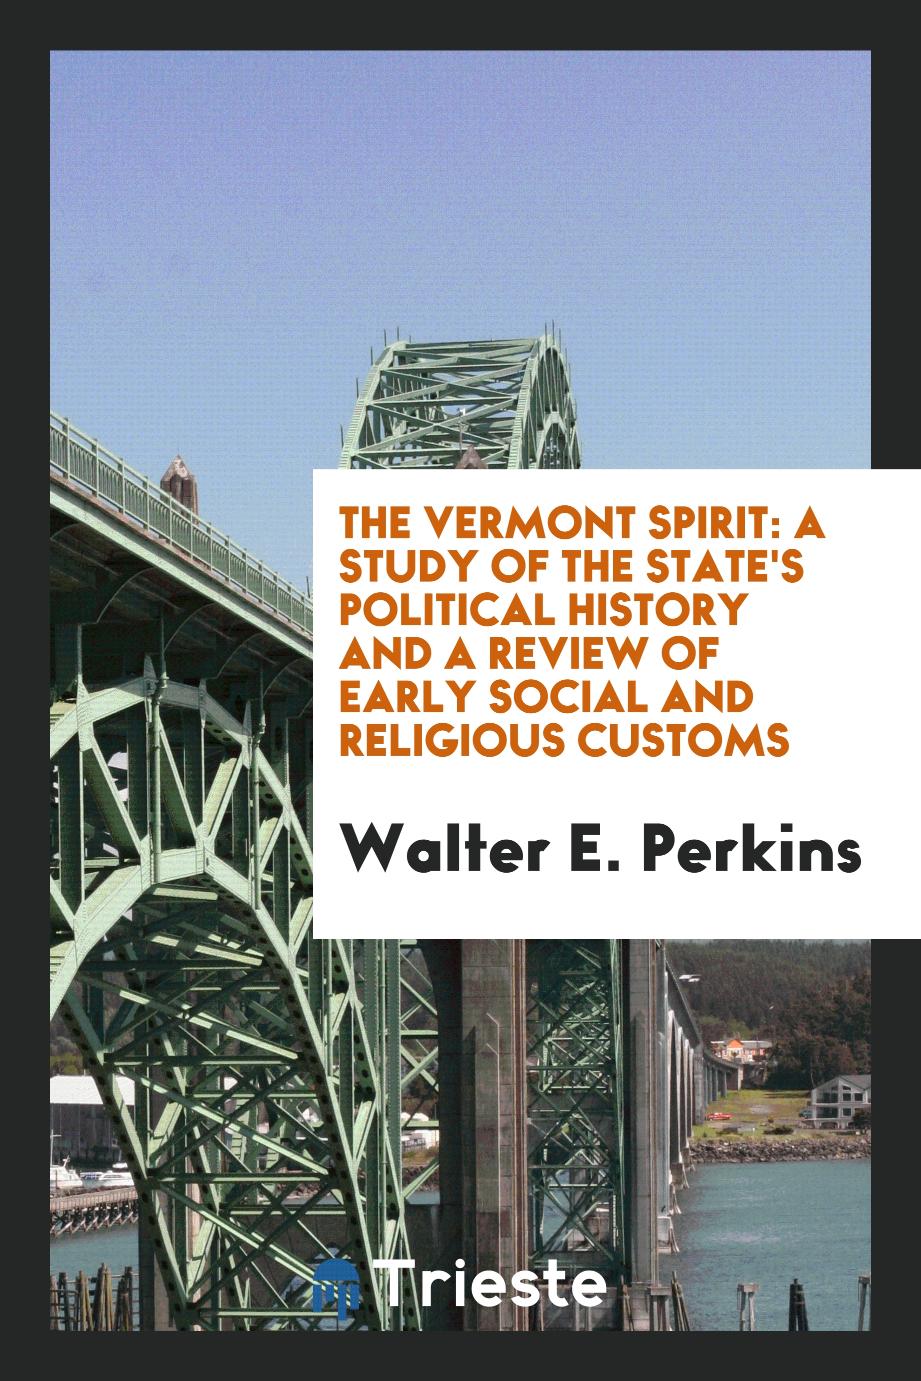 The Vermont Spirit: A Study of the State's Political History and a Review of early social and religious customs